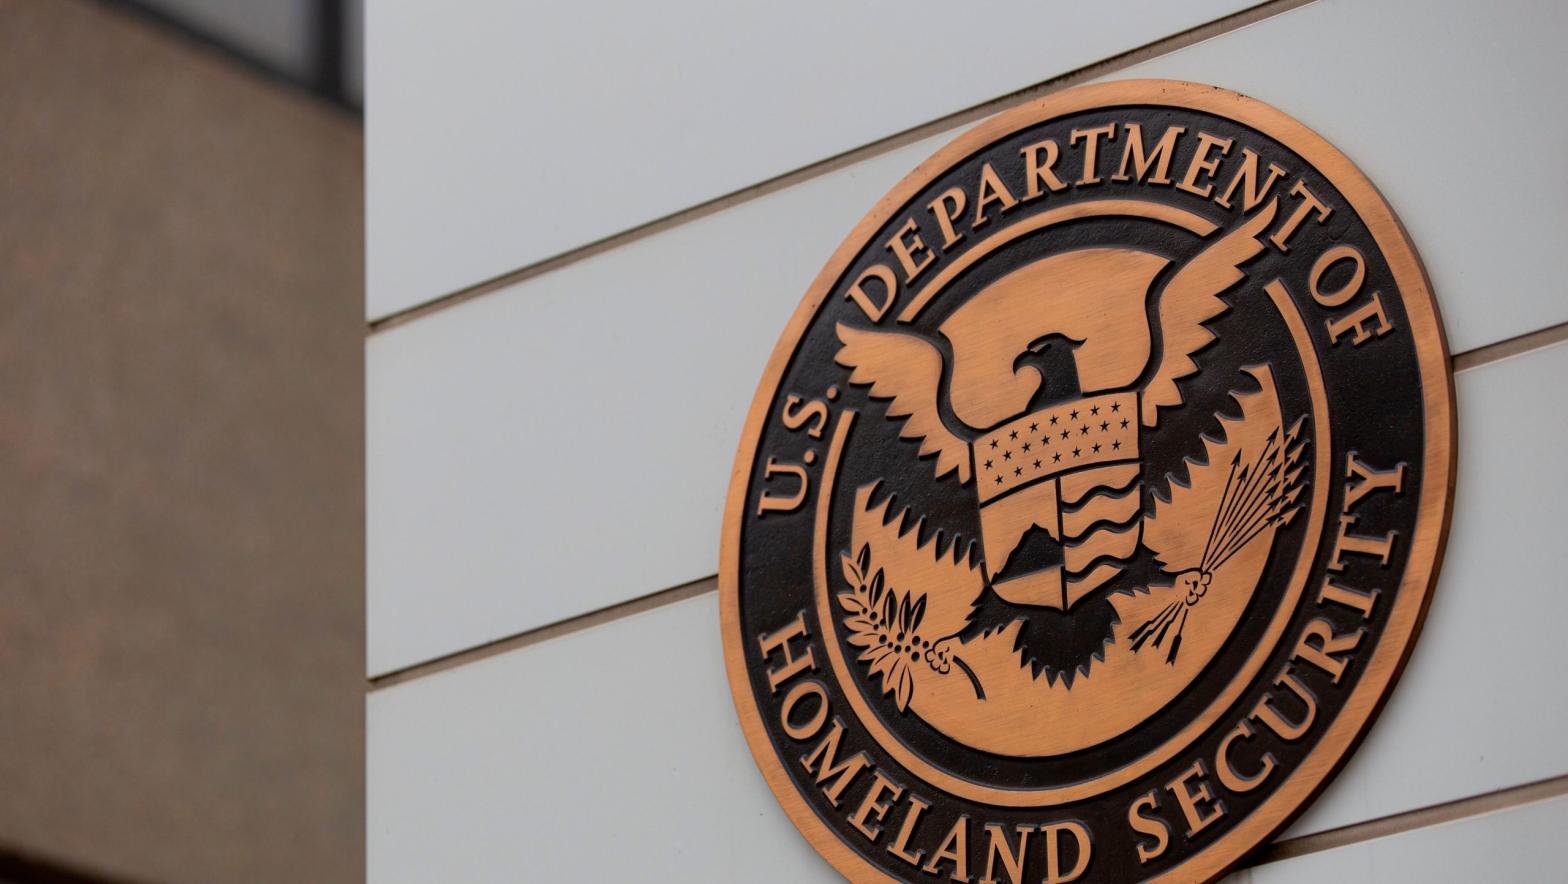 The U.S. Department of Homeland Security building seen in Washington, DC. (Photo: Alastair Pike / AFP, Getty Images)